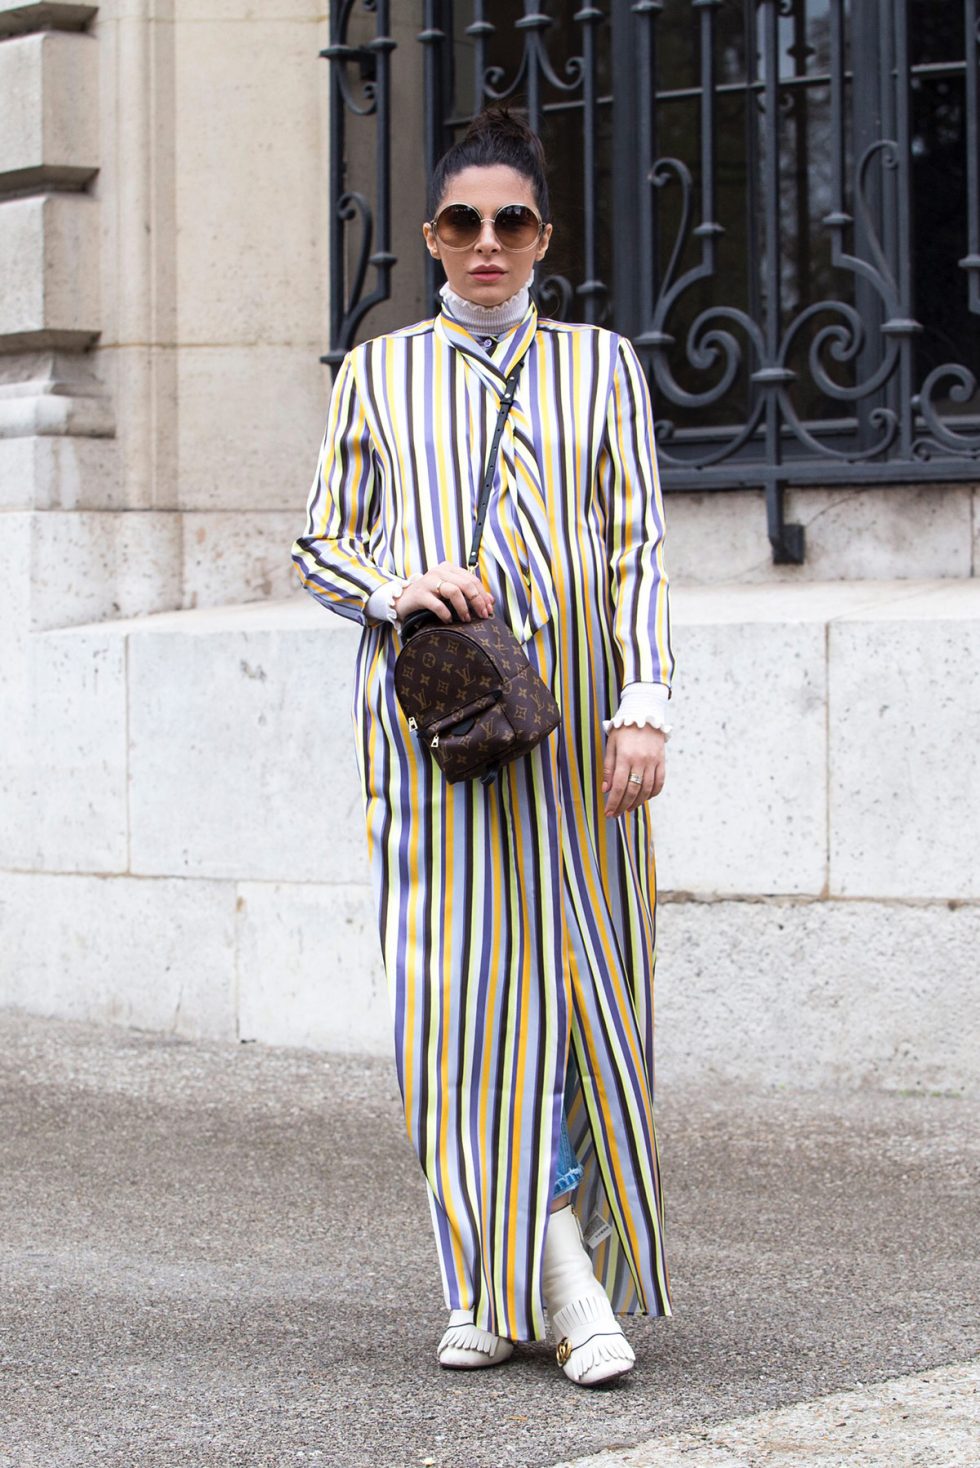 Striped Dress With Jeans & Statement Sunglasses At Paris Fashion Week